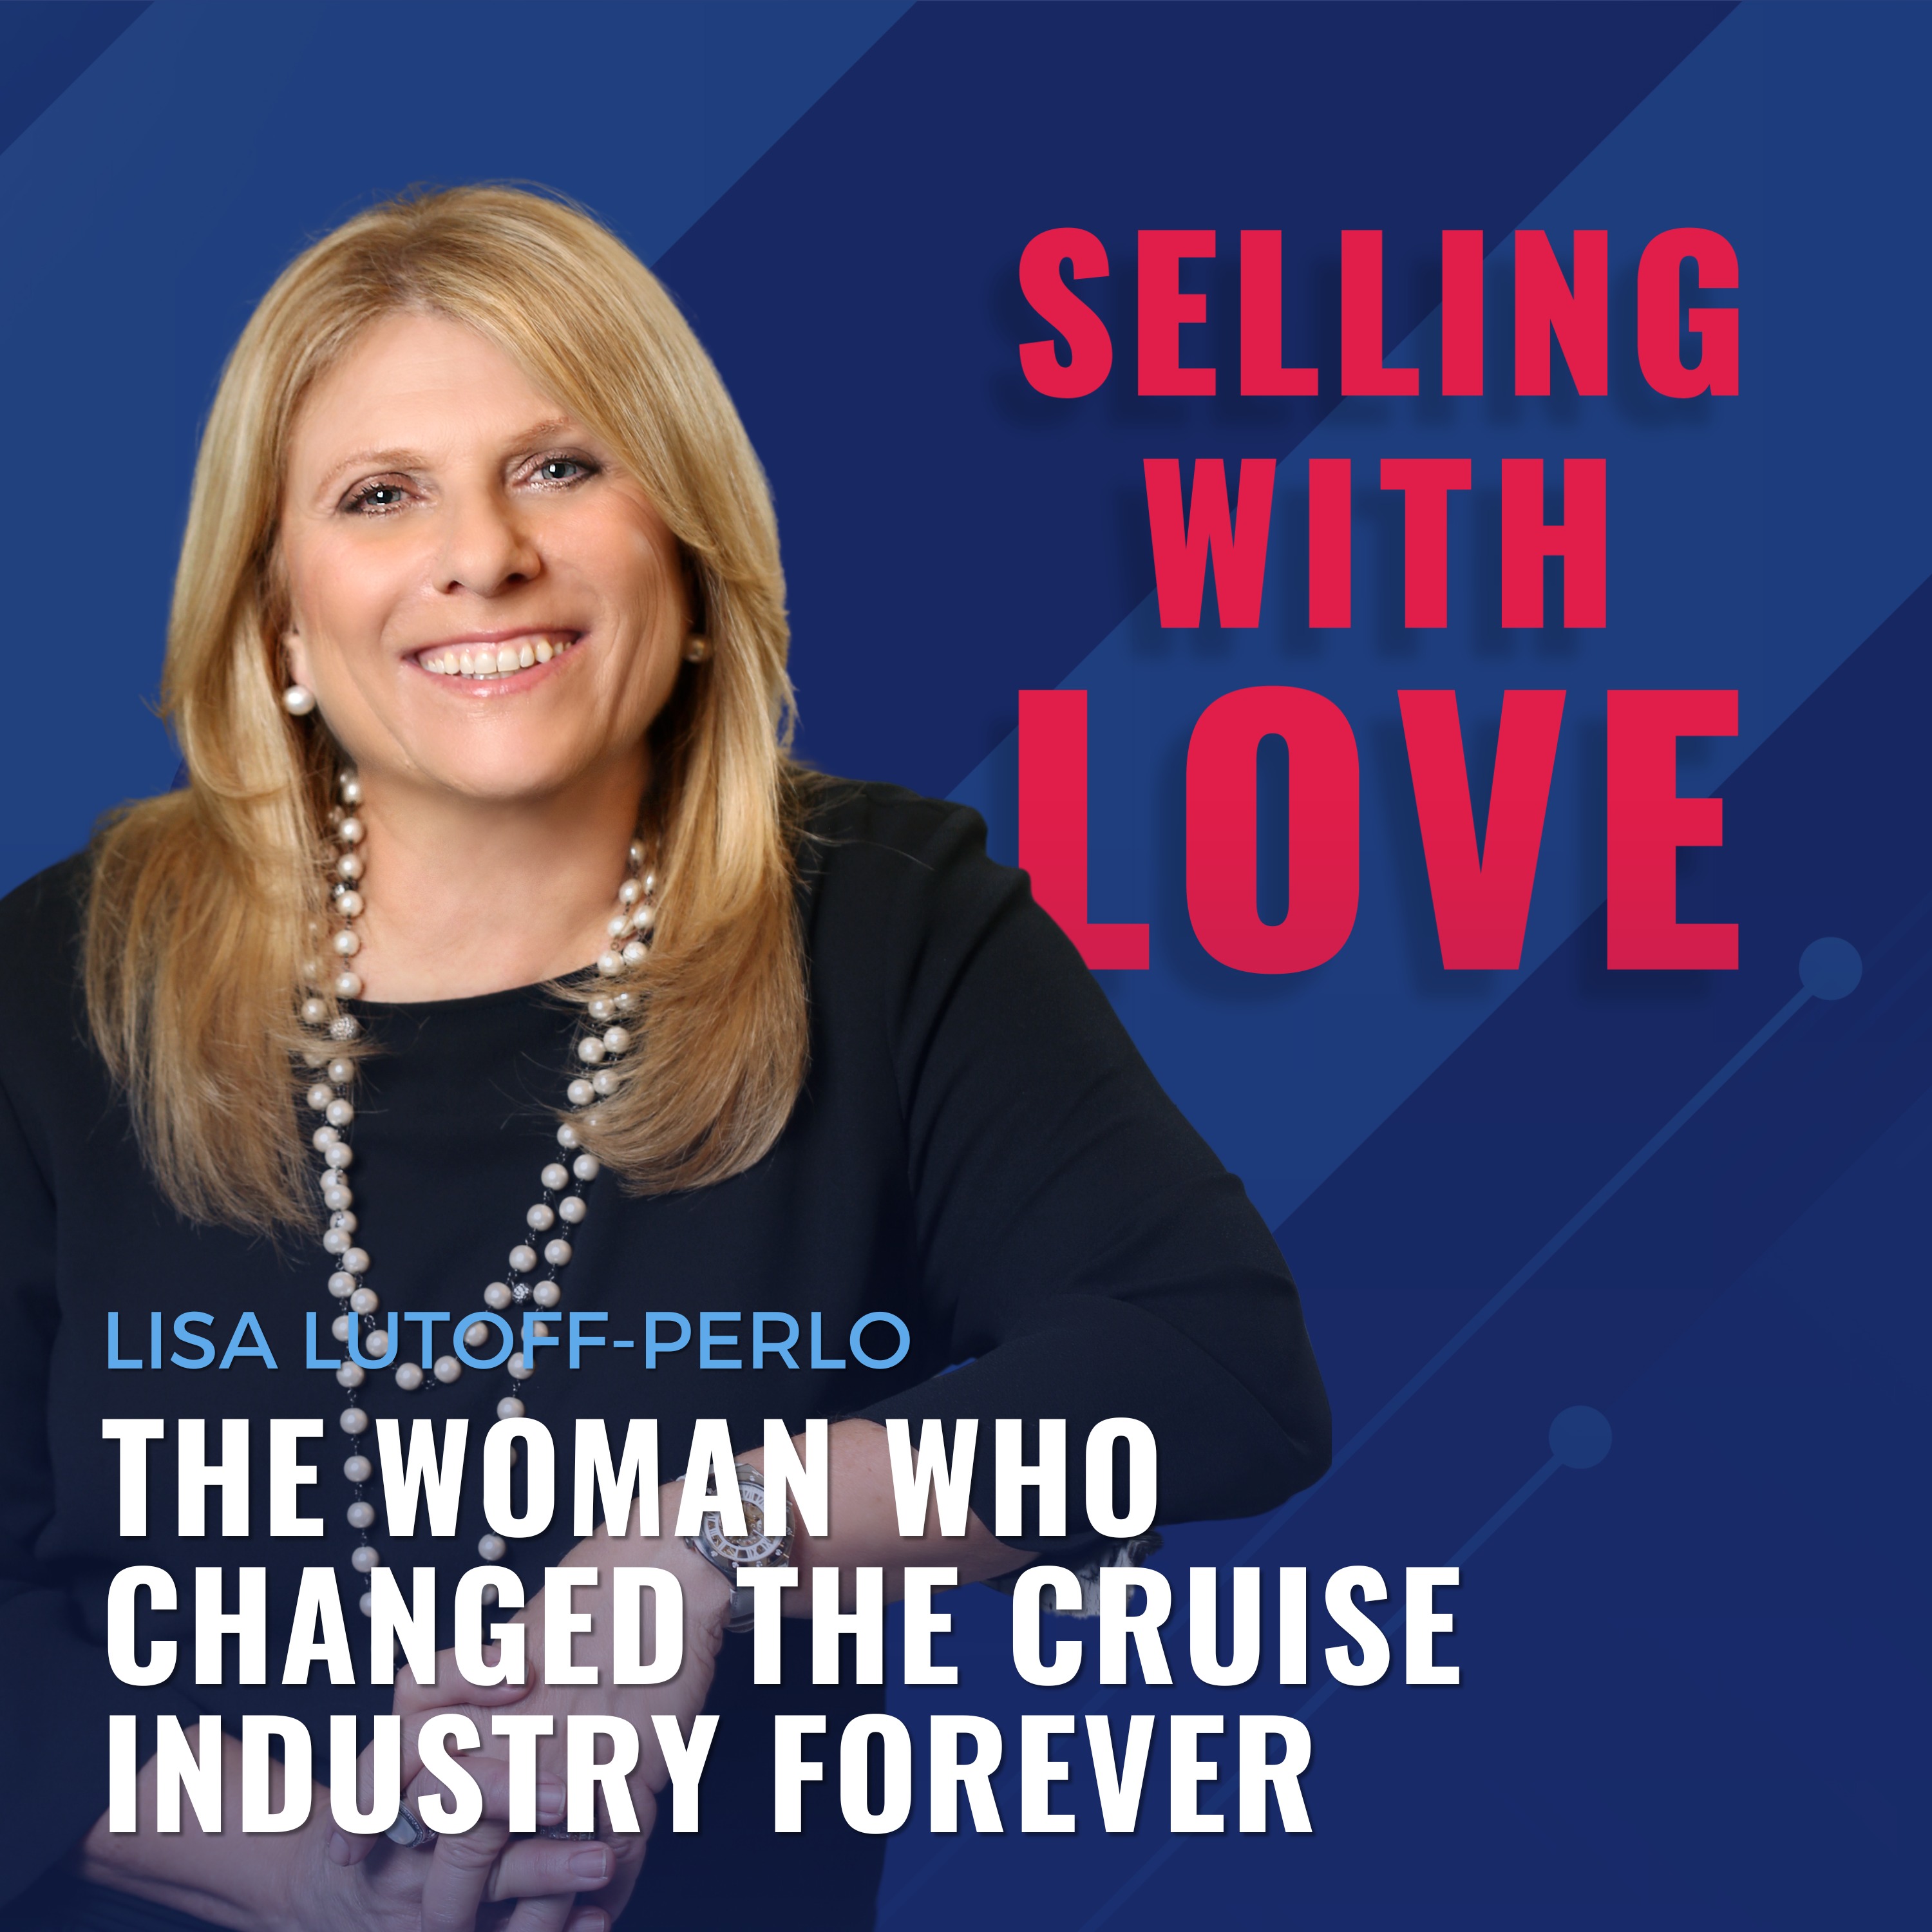 The Woman Who Changed the Cruise Industry Forever